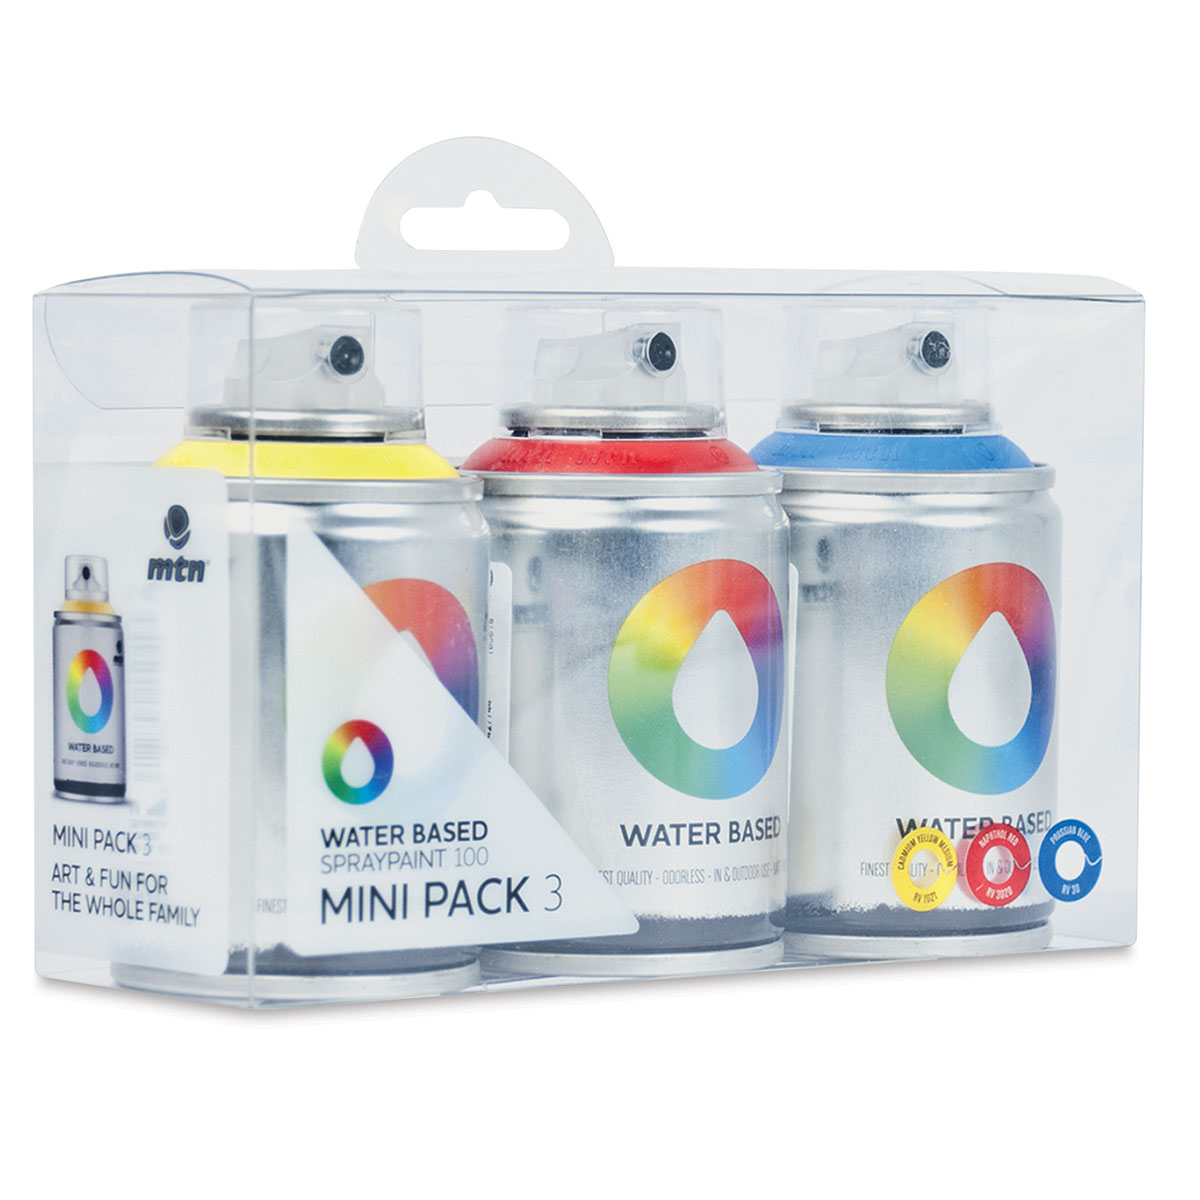 Mtn Water Based Spray Paint - RBY Mini Pack of 3, 100 ml Cans